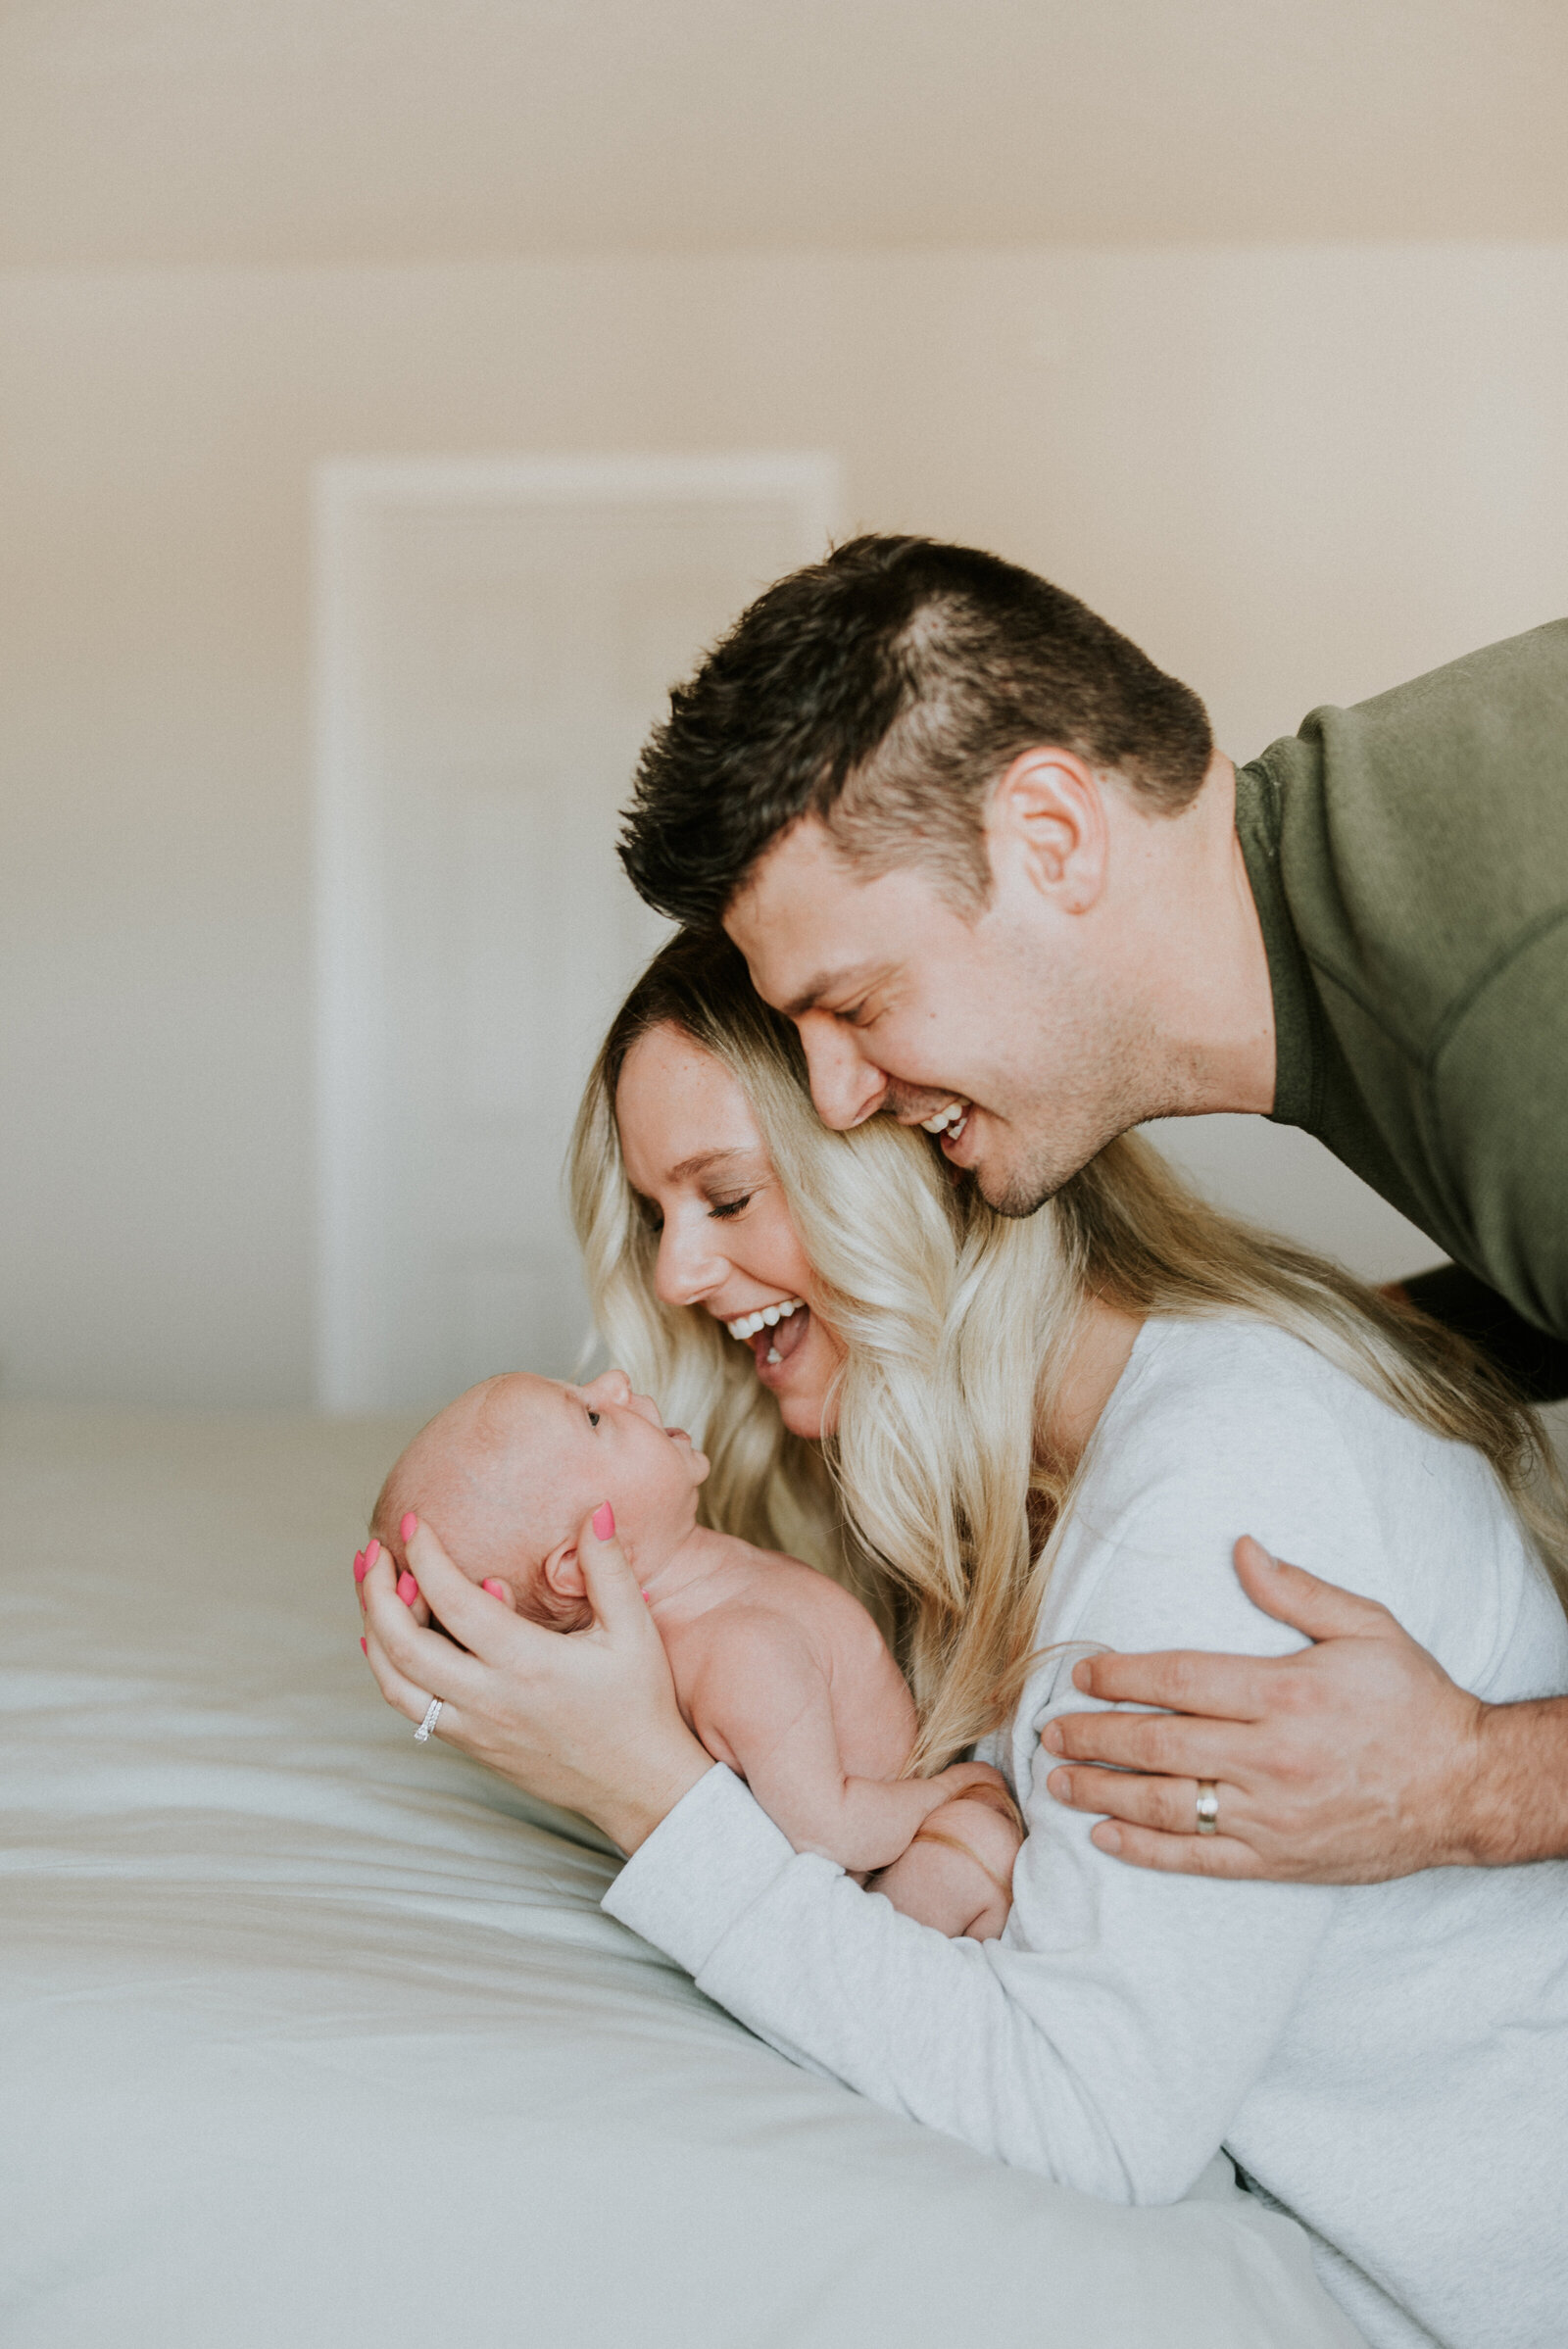 Experience tenderness in the Twin Cities with at-home newborn portraits by Shannon Kathleen Photography. Schedule your session for warmth and style